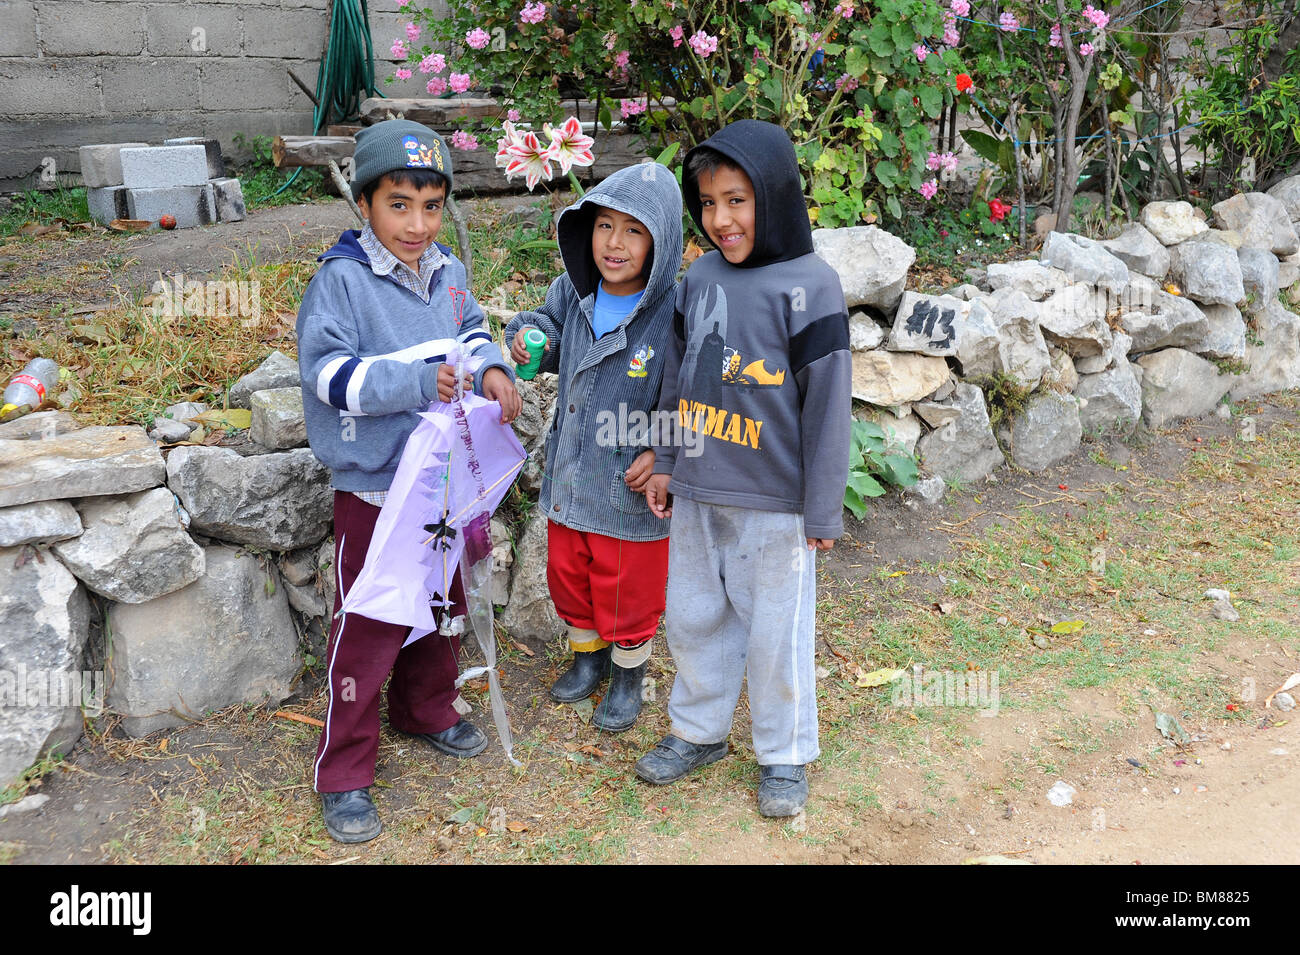 3 young boys with kite standing by roadside smiling. Santiago Apoala, Mexico. Stock Photo